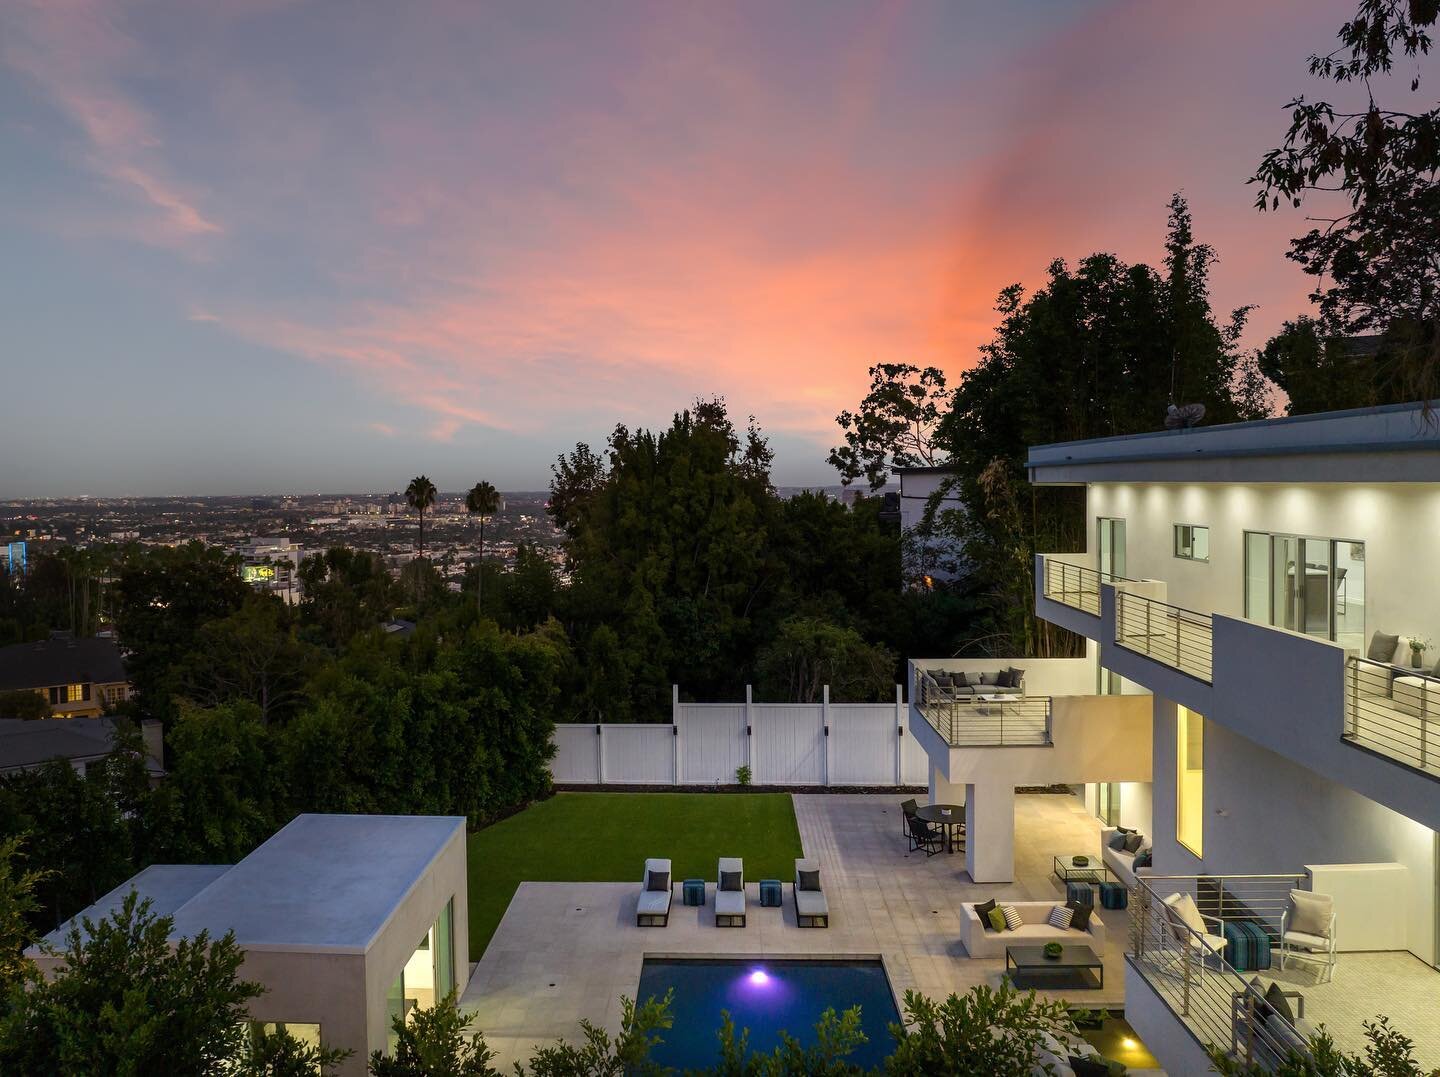 JUST LISTED FOR LEASE | 
EIGHTYSEVEN10 St Ives offers the ultimate in Hollywood Hills luxury. Enter this spacious home with an open floor plan and indoor/outdoor living and relish the sweeping views from various areas of this fabulous home. Enjoy the